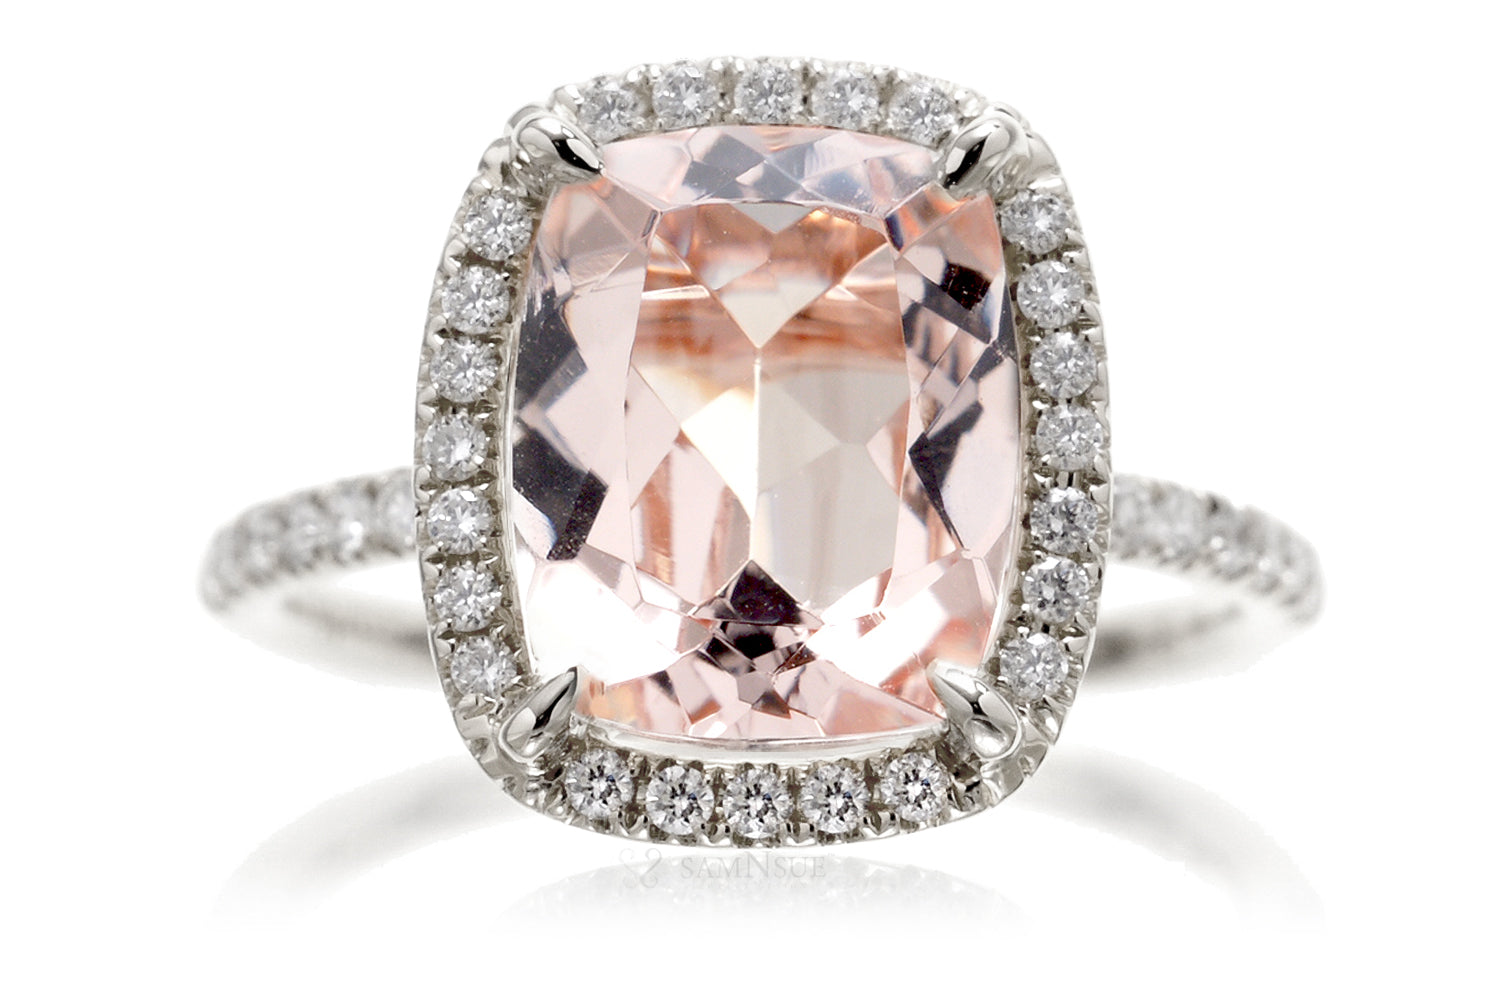 The Drenched Cushion Morganite